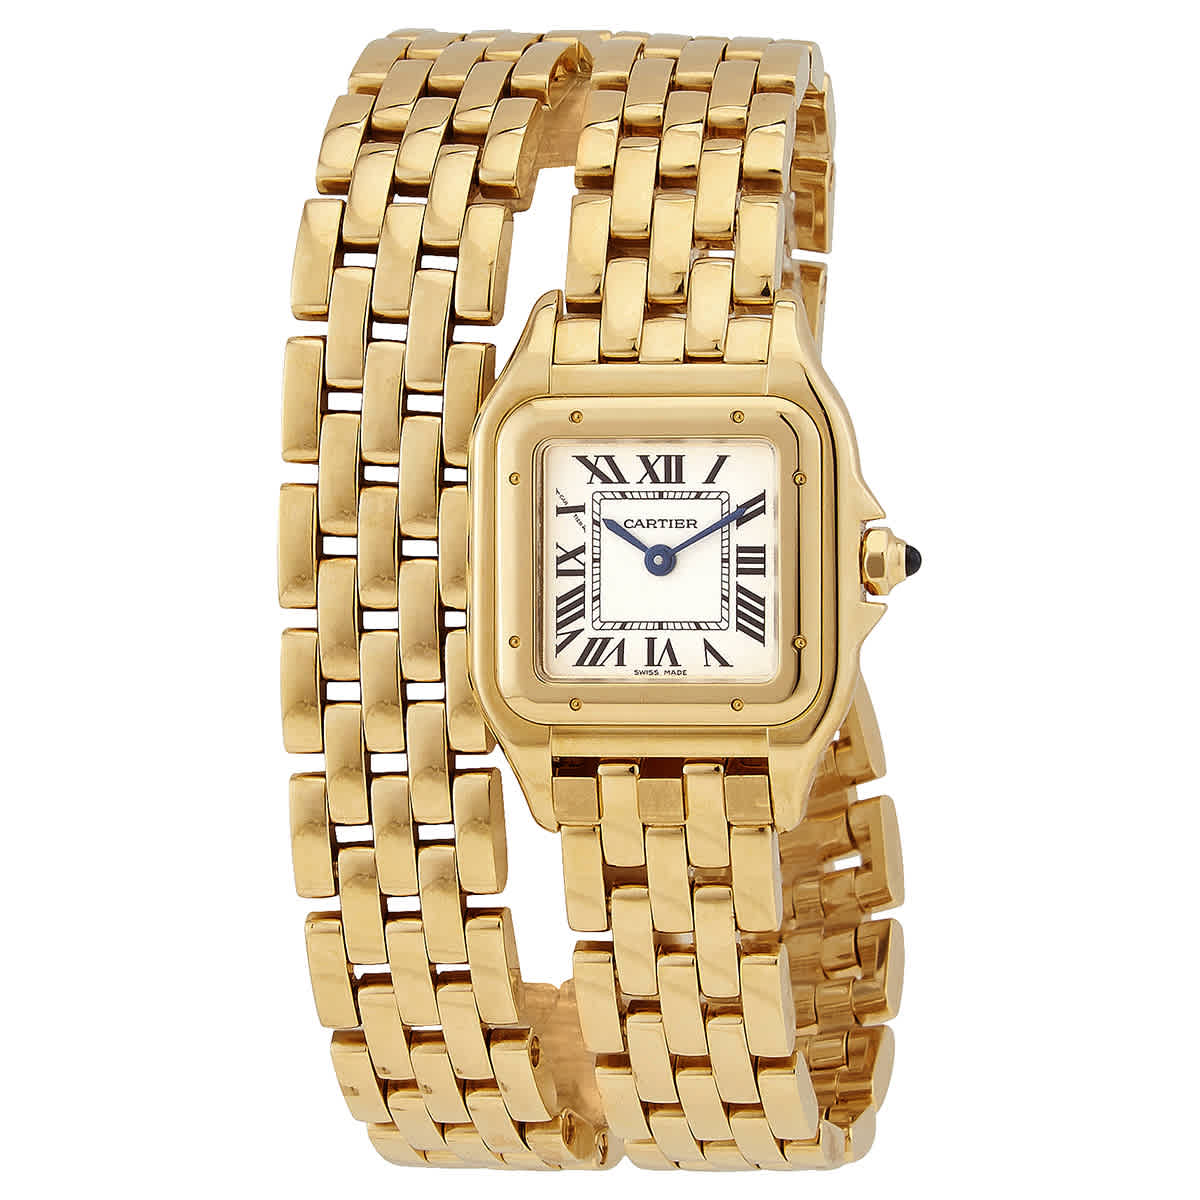 Cartier Panthere 18k Yellow Gold Double Loop Quartz White Dial Ladies Watch Wgpn0013 In Blue,gold Tone,white,yellow